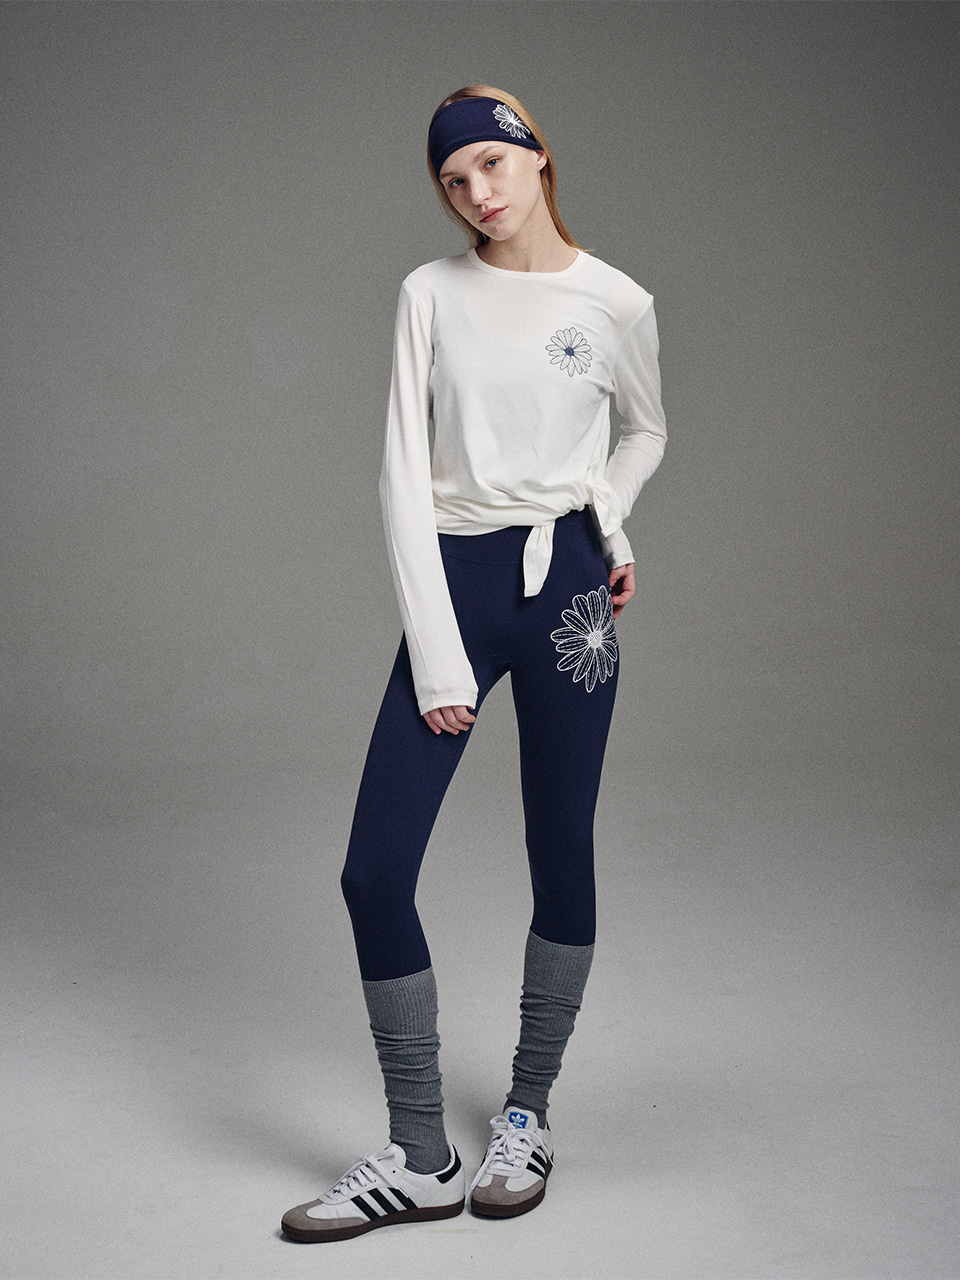 [ACTIF] AIRLIFT side slit top theflower_IVORY NAVY